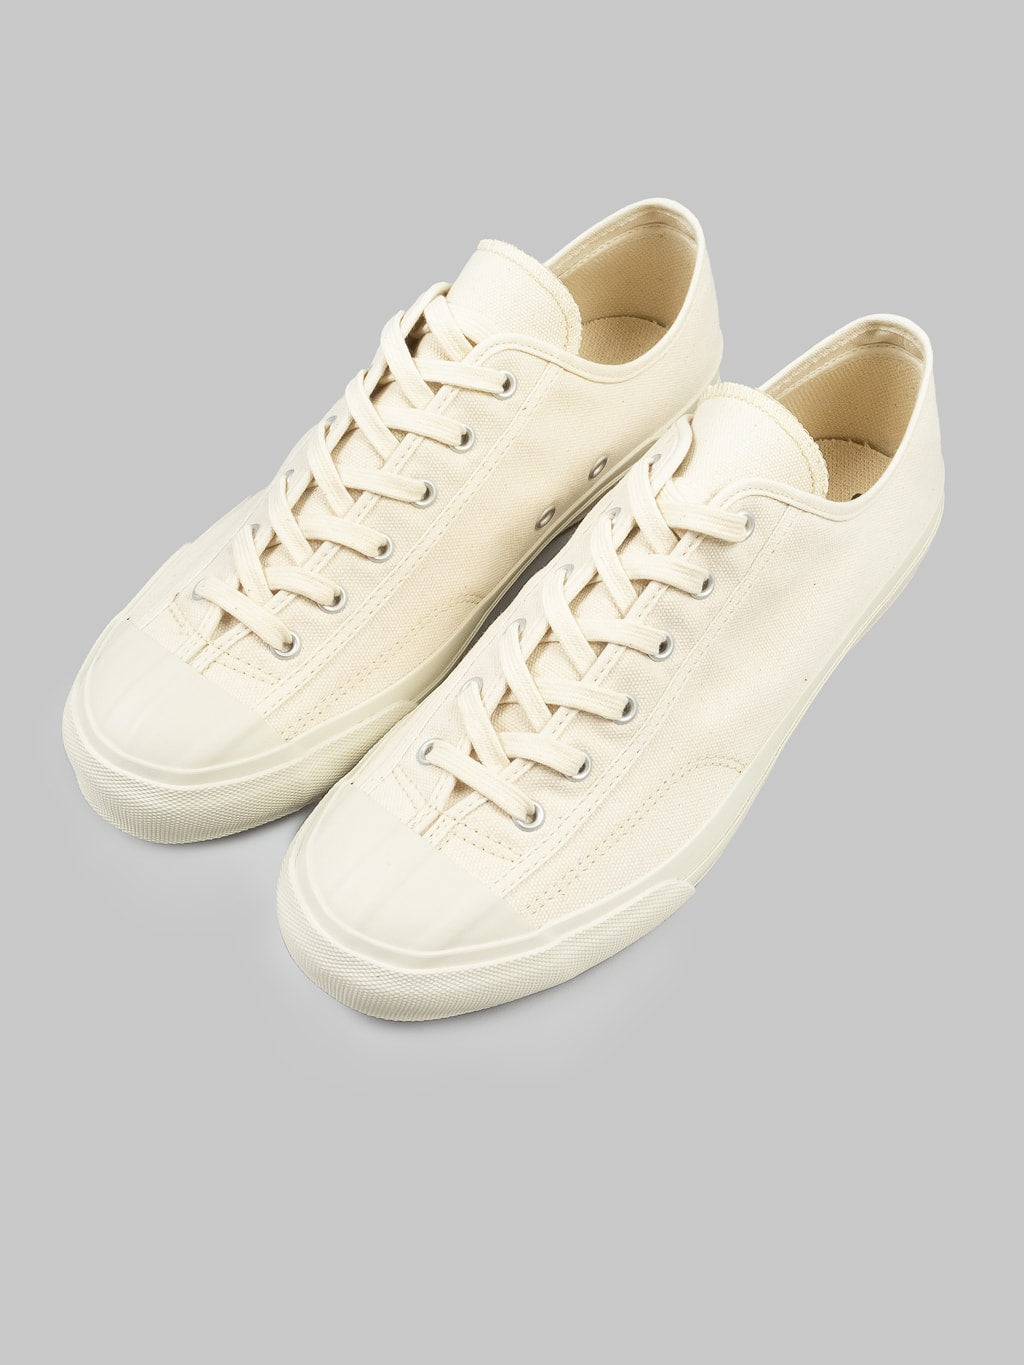 Moonstar Gym Classic White Sneakers craftsmanship